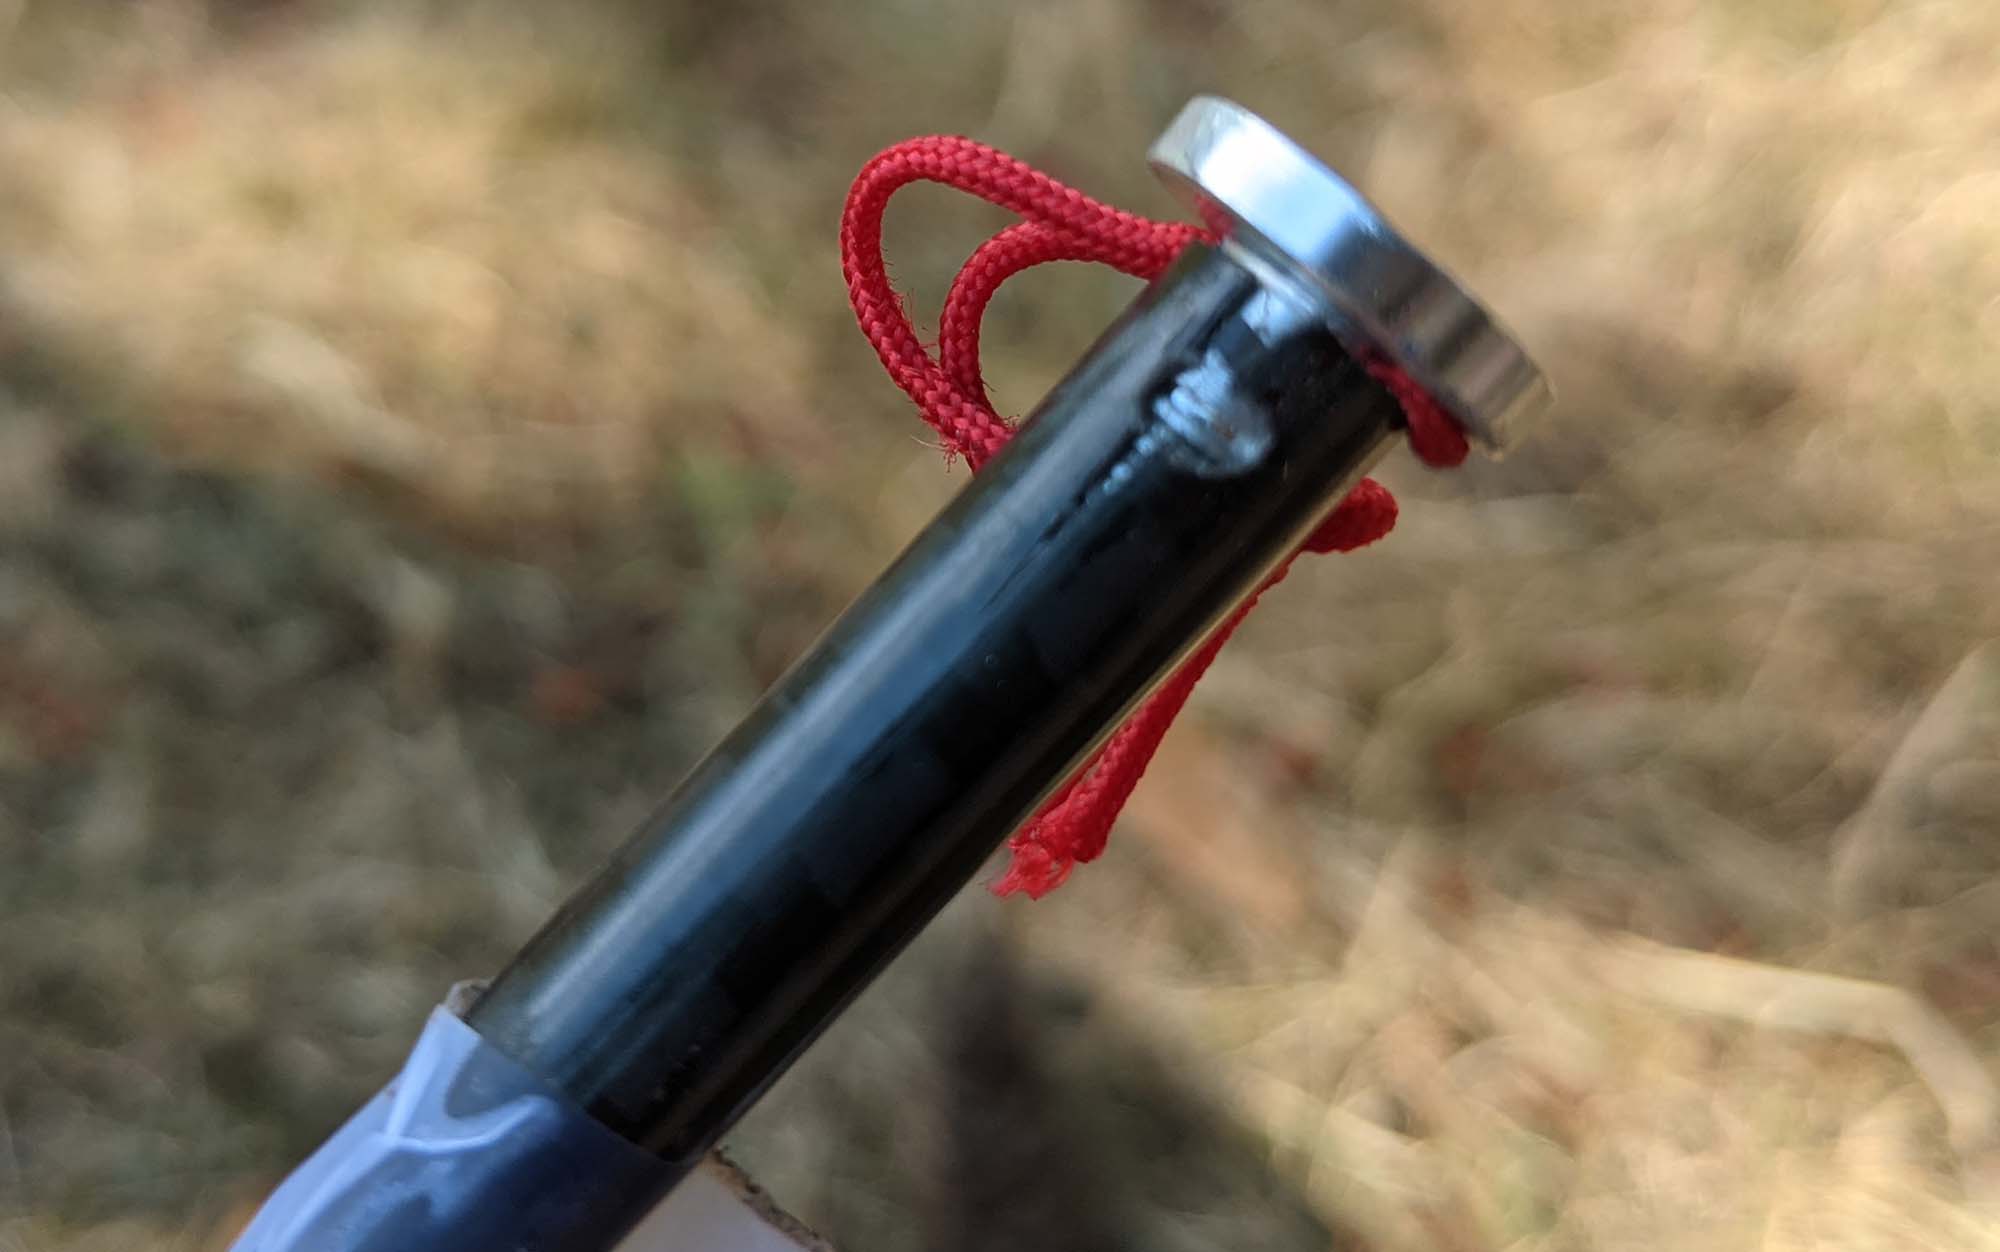 The MSR Carbon Core tent stake splintered during the hard ground test.